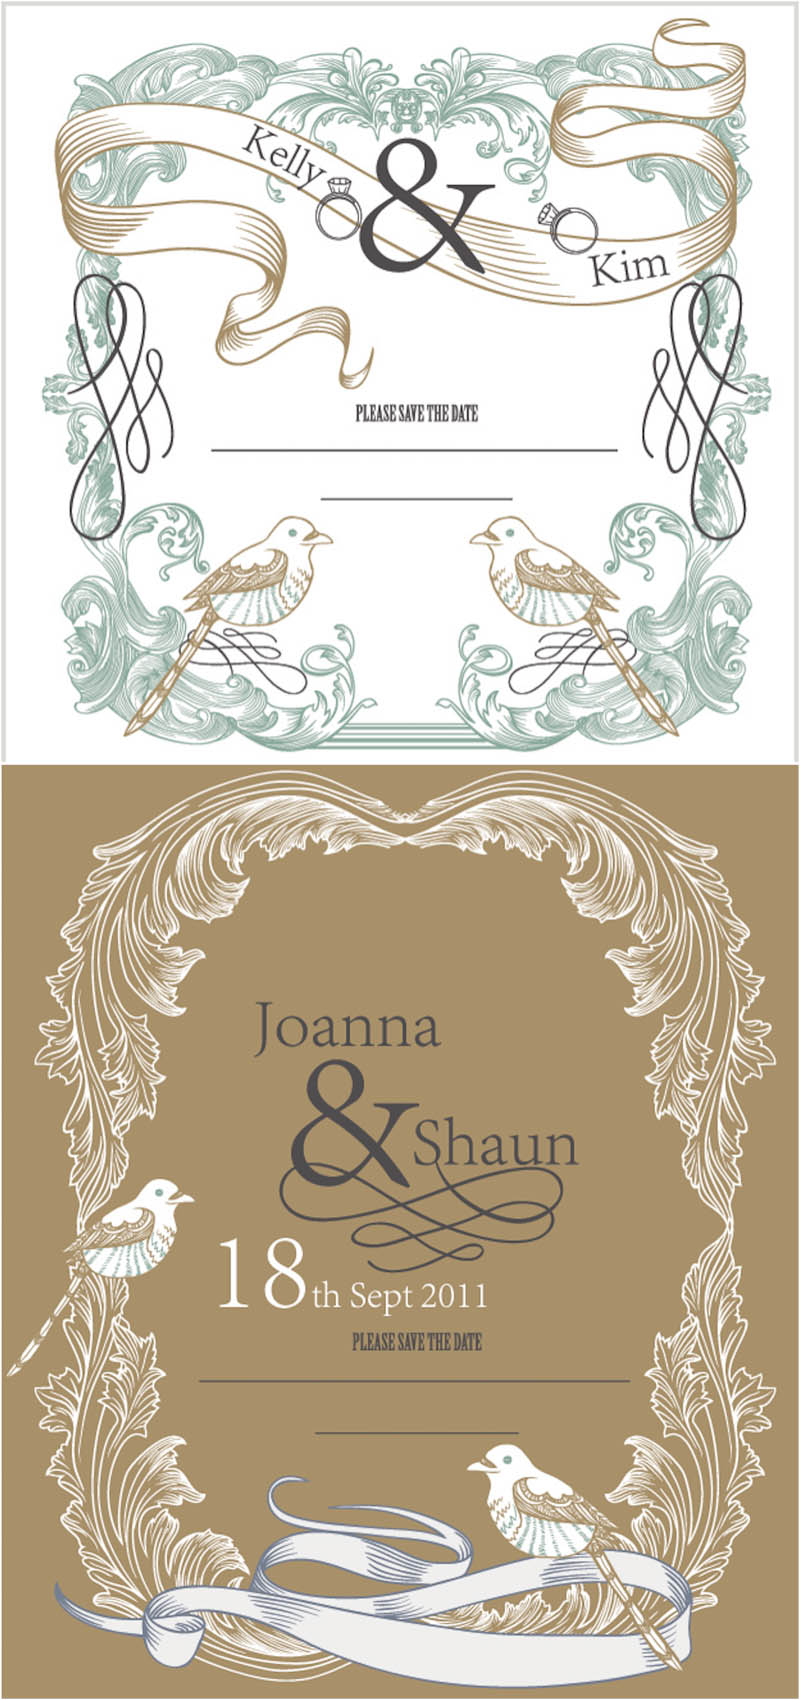 save-the-date-wedding-cards-vector